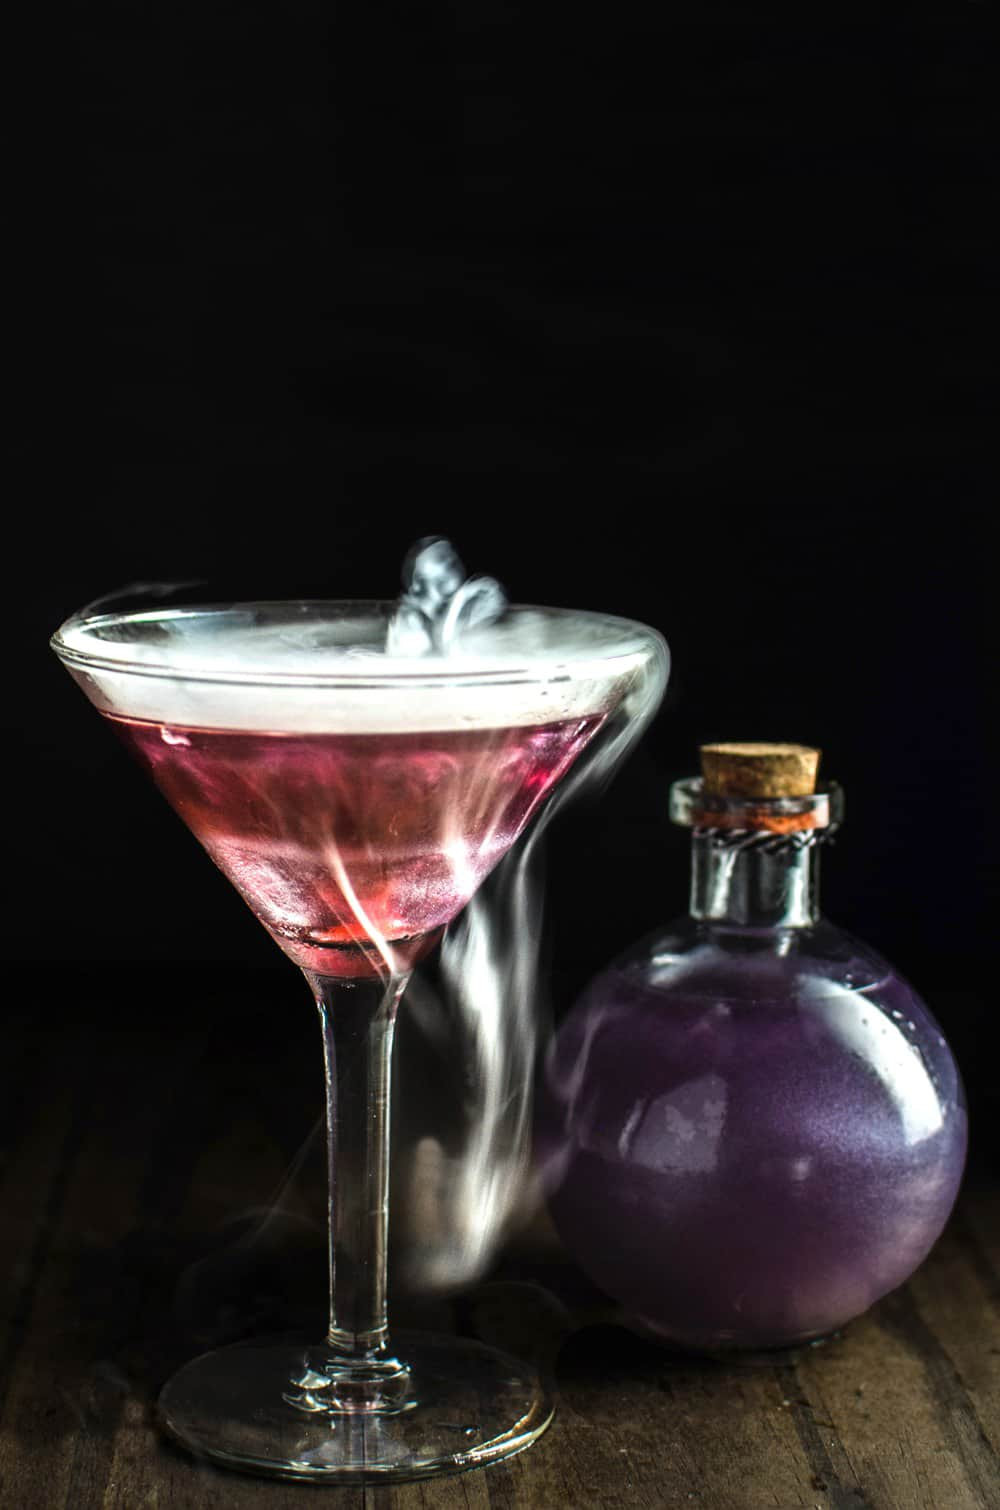 Easy Halloween Alcoholic Drinks
 The Witch s Heart Halloween Cocktail